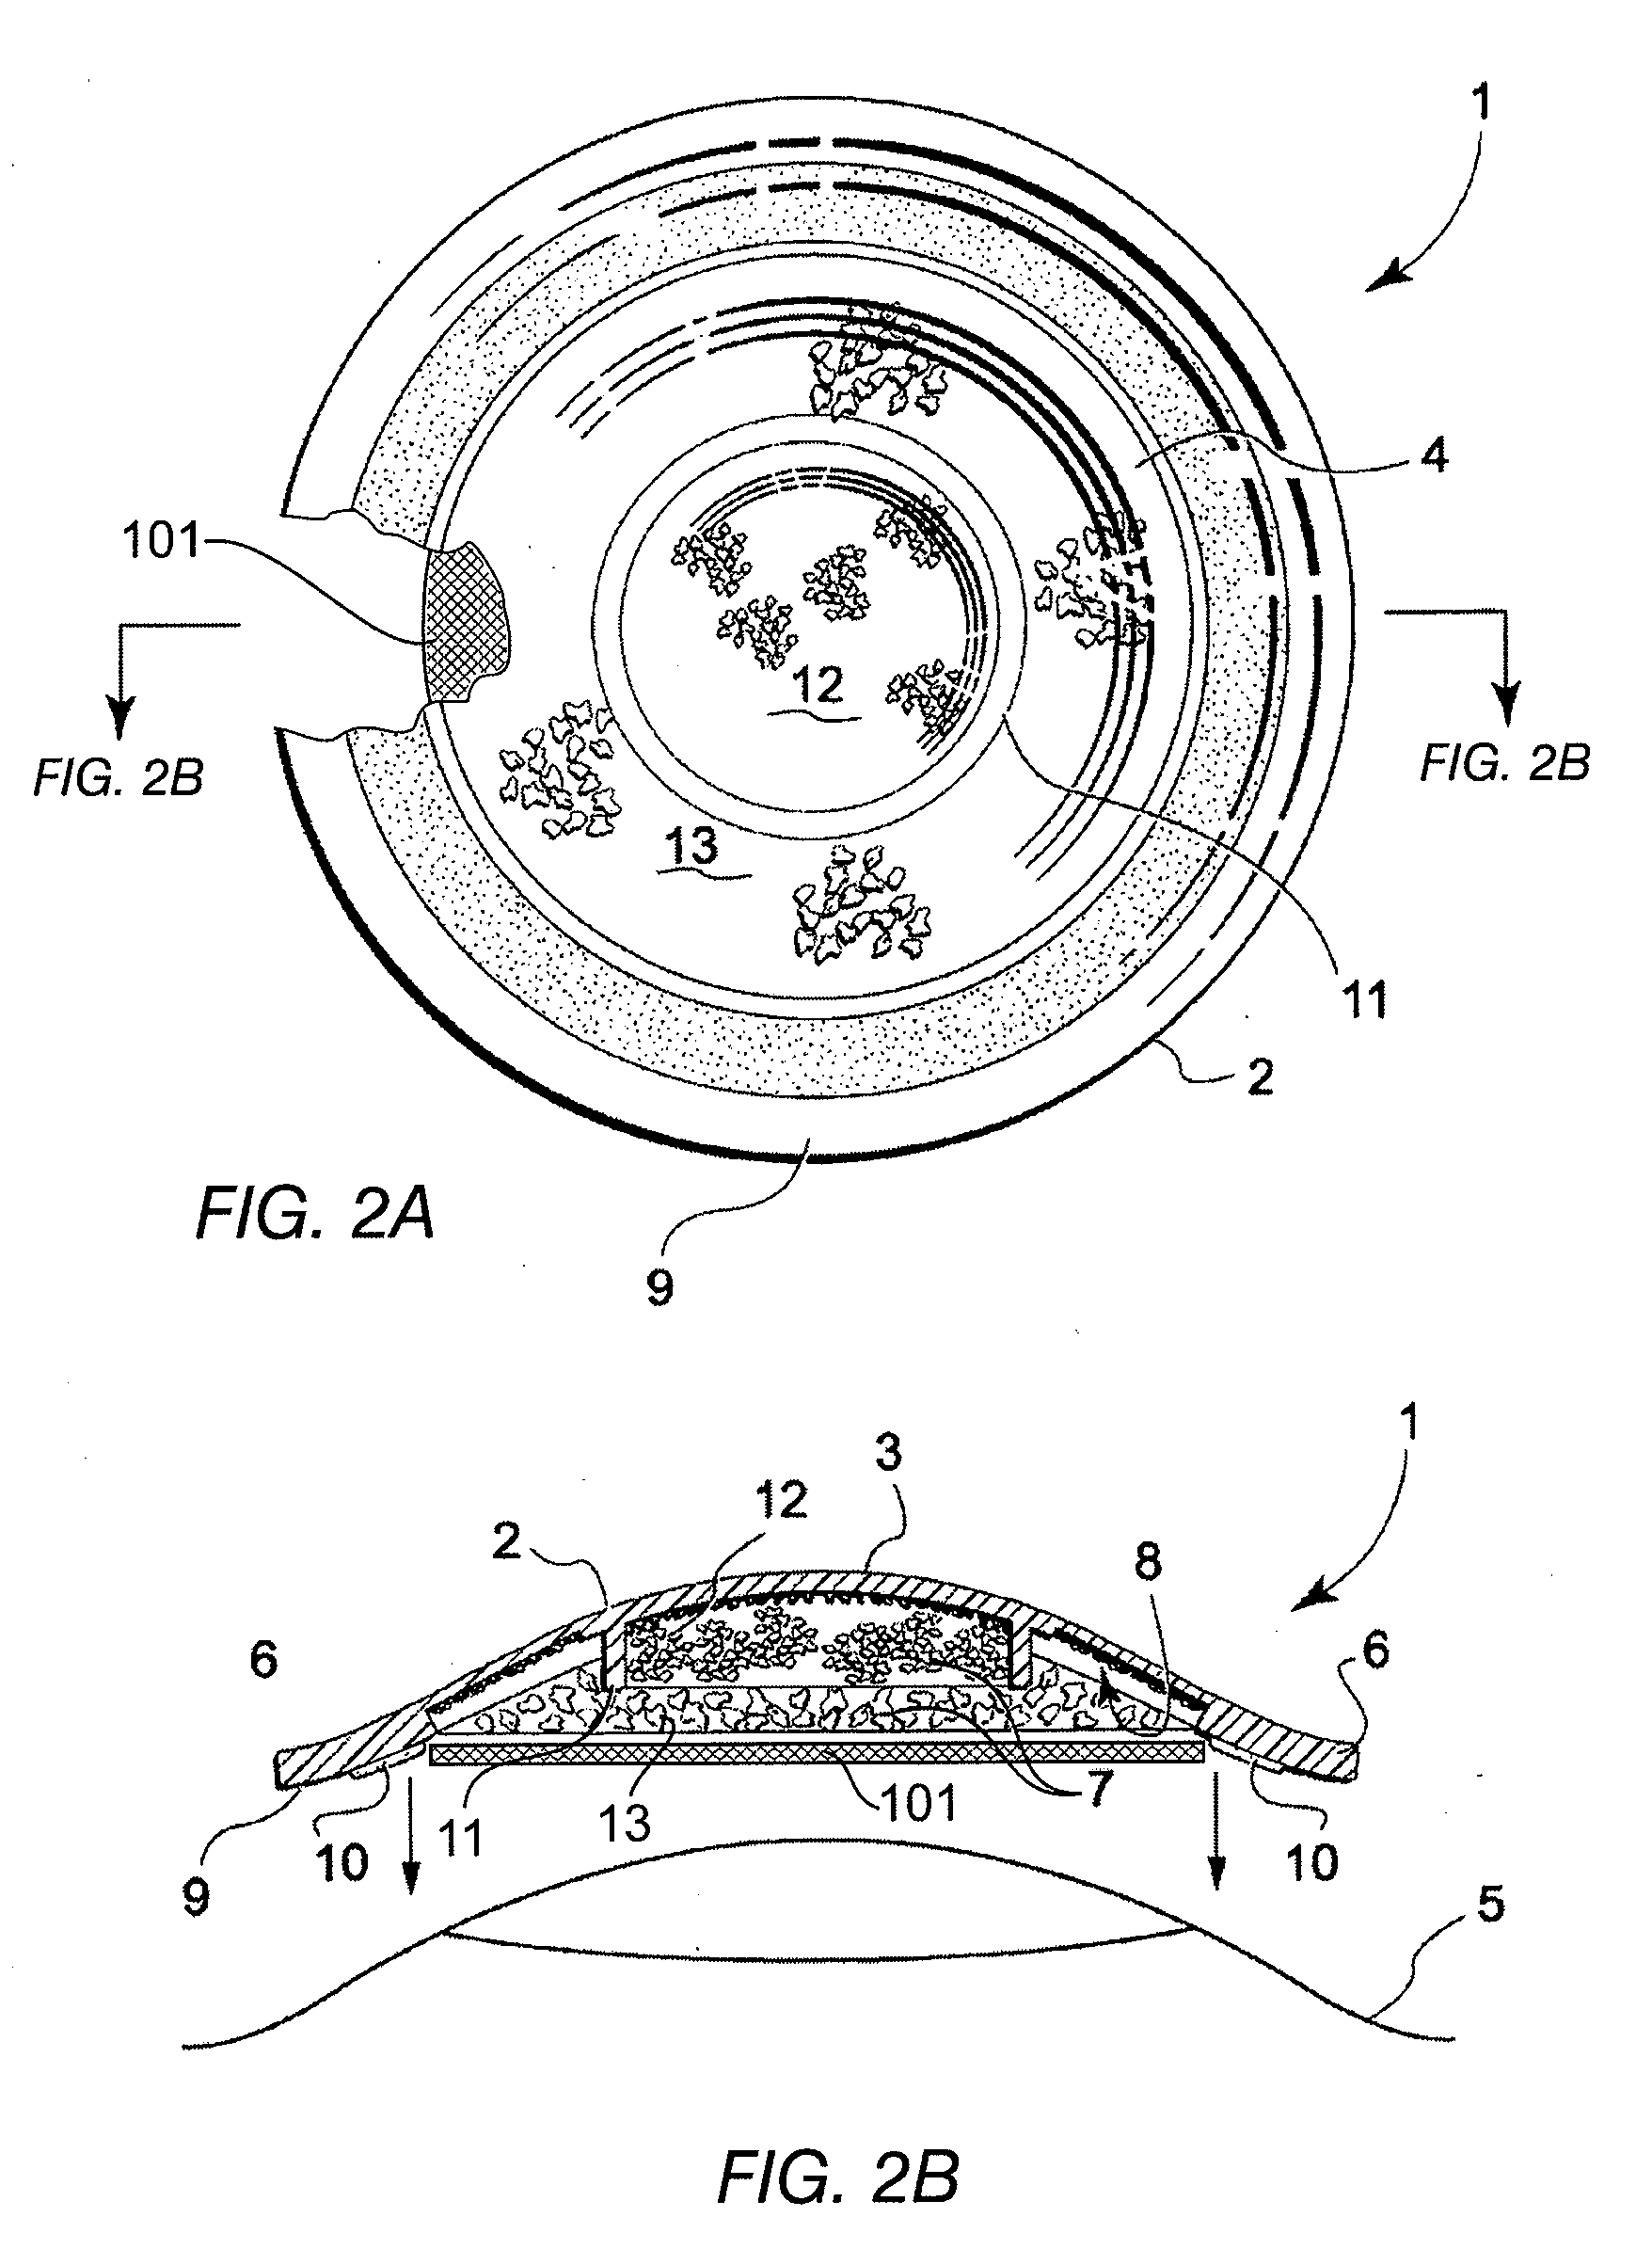 Cultured tissue transplant device